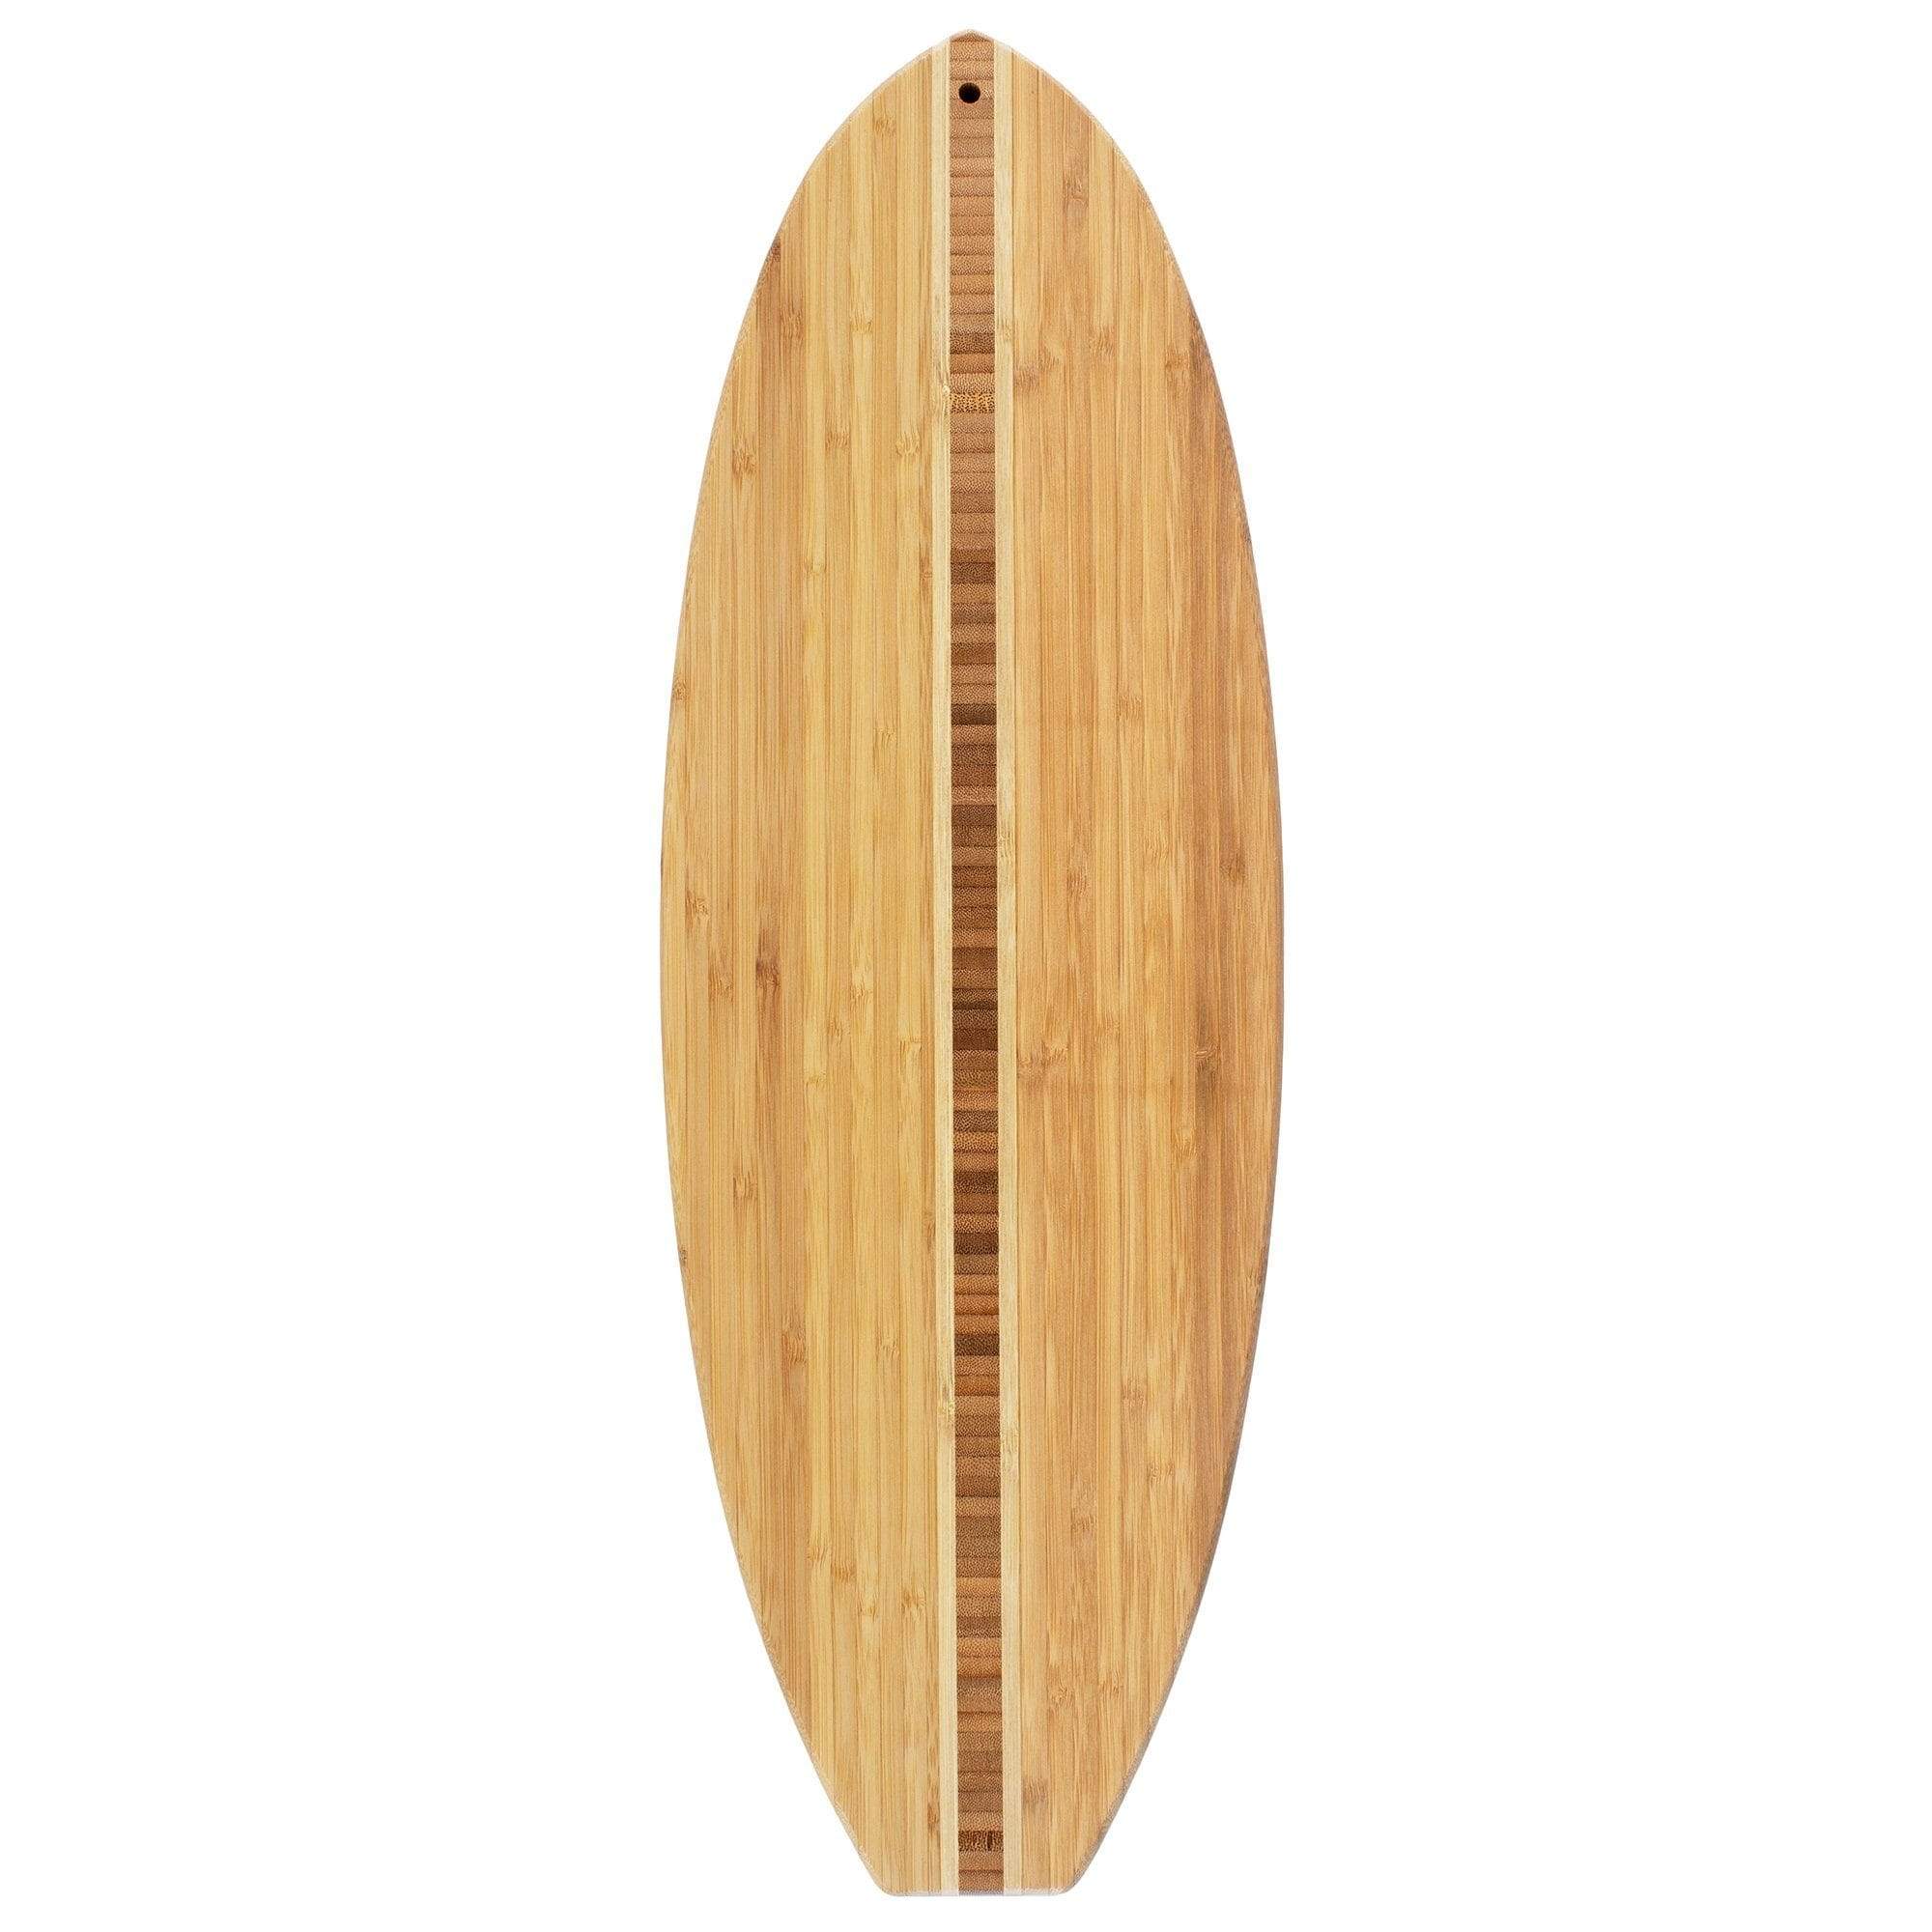 https://totallybamboo.com/cdn/shop/products/surfboard-shaped-bamboo-serving-and-cutting-board-23-x-7-12-totally-bamboo-953099.jpg?v=1627855580